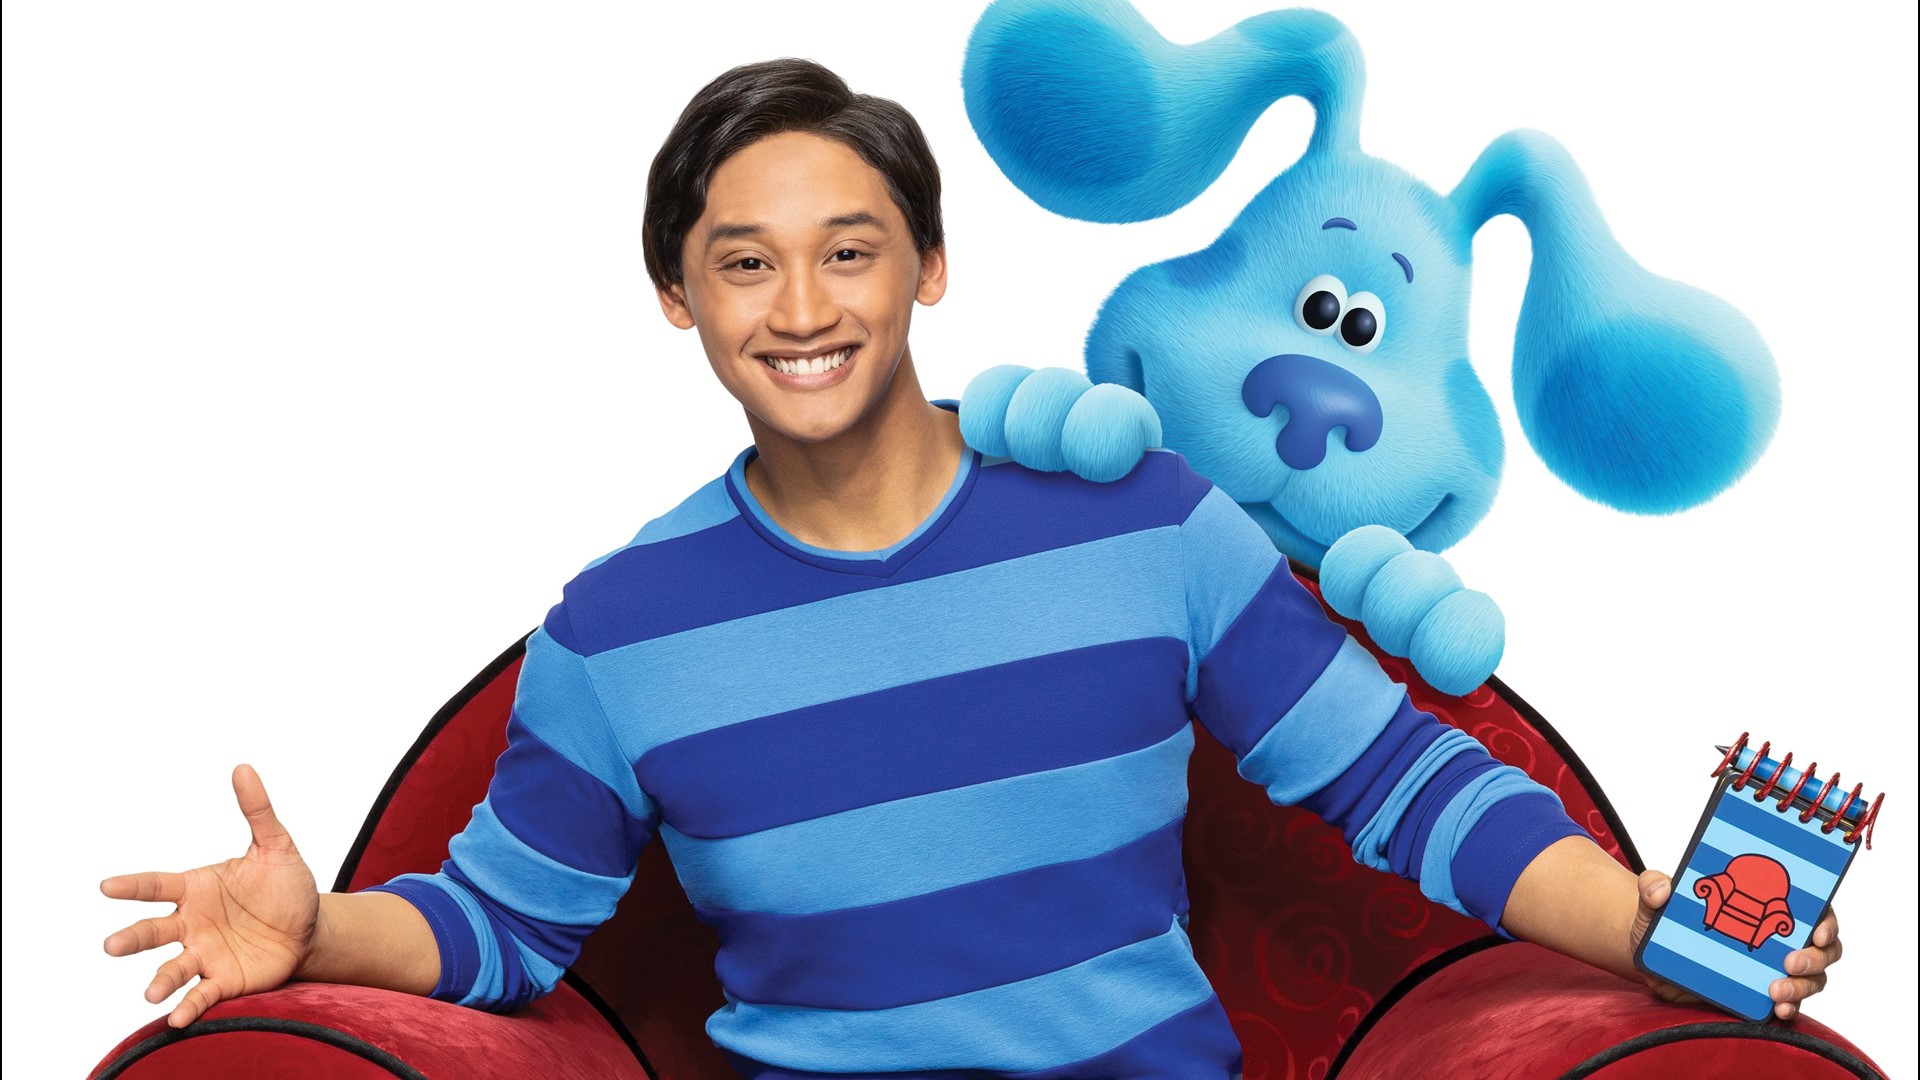 Meet the man picked to be host of the Blue s Clues reboot fox61 com